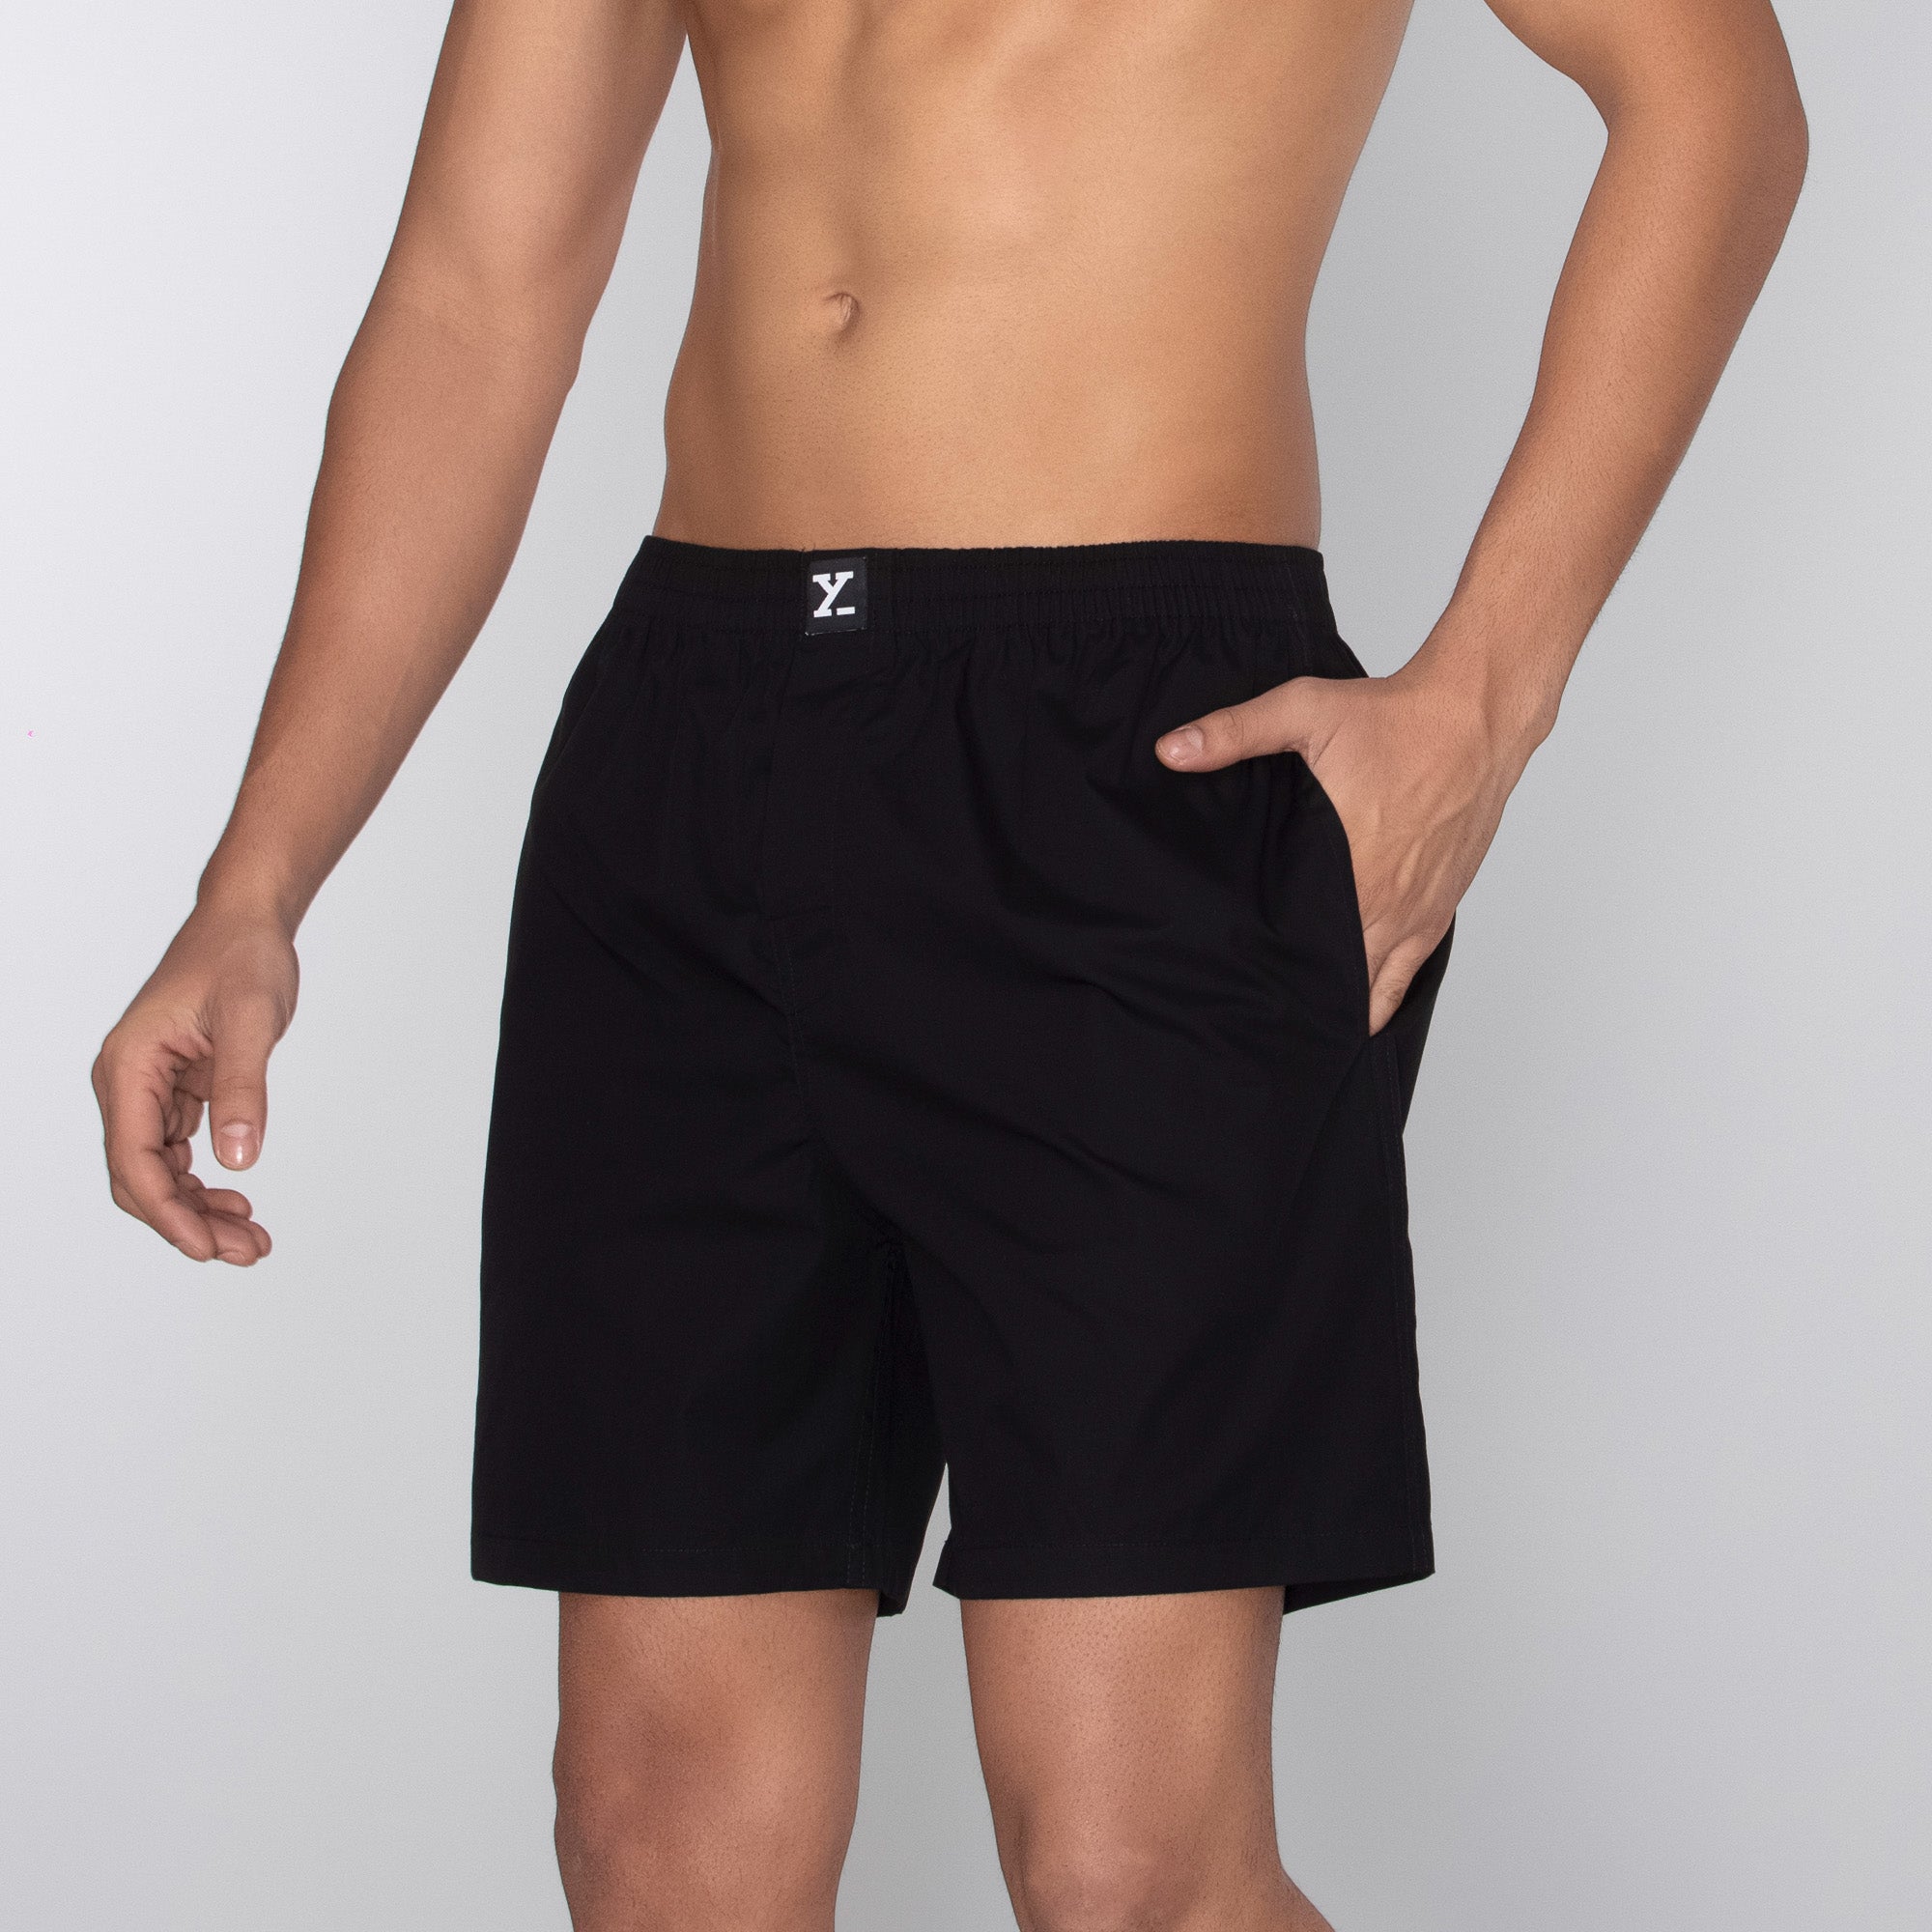 Pace Super Combed Cotton Boxer Shorts For Men Black Knight - XYXX Mens Apparels